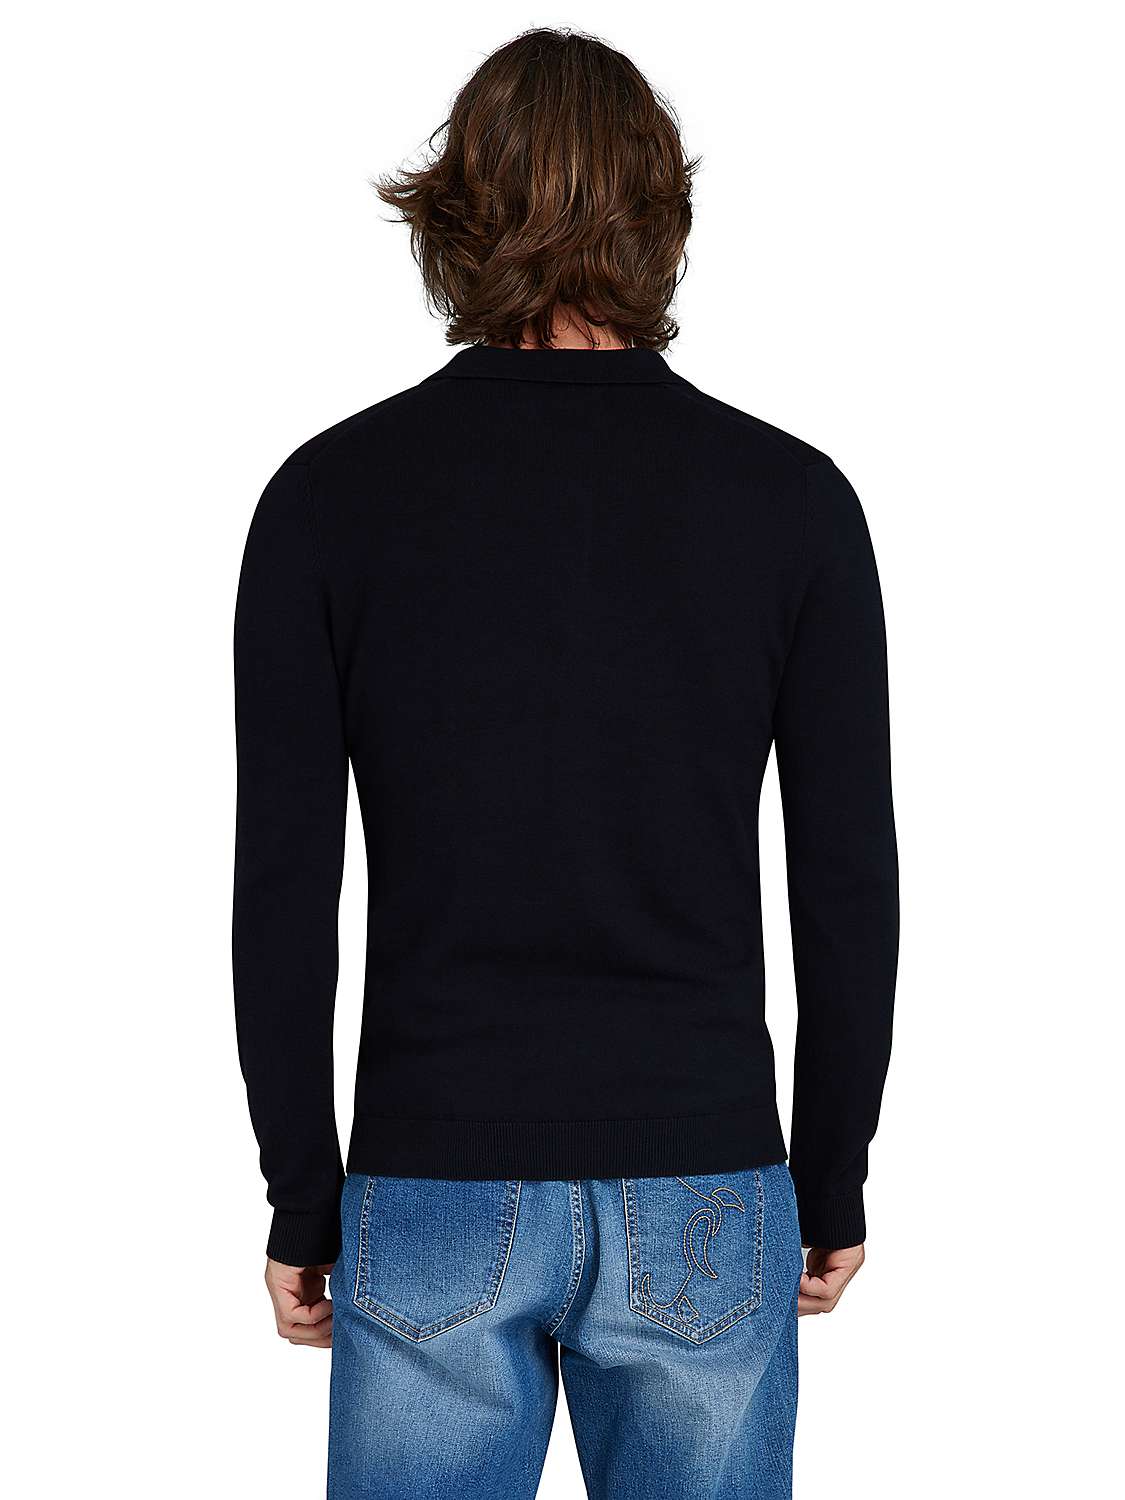 Buy Raging Bull Classic Knitted Long Sleeve Polo Shirt, Black Online at johnlewis.com